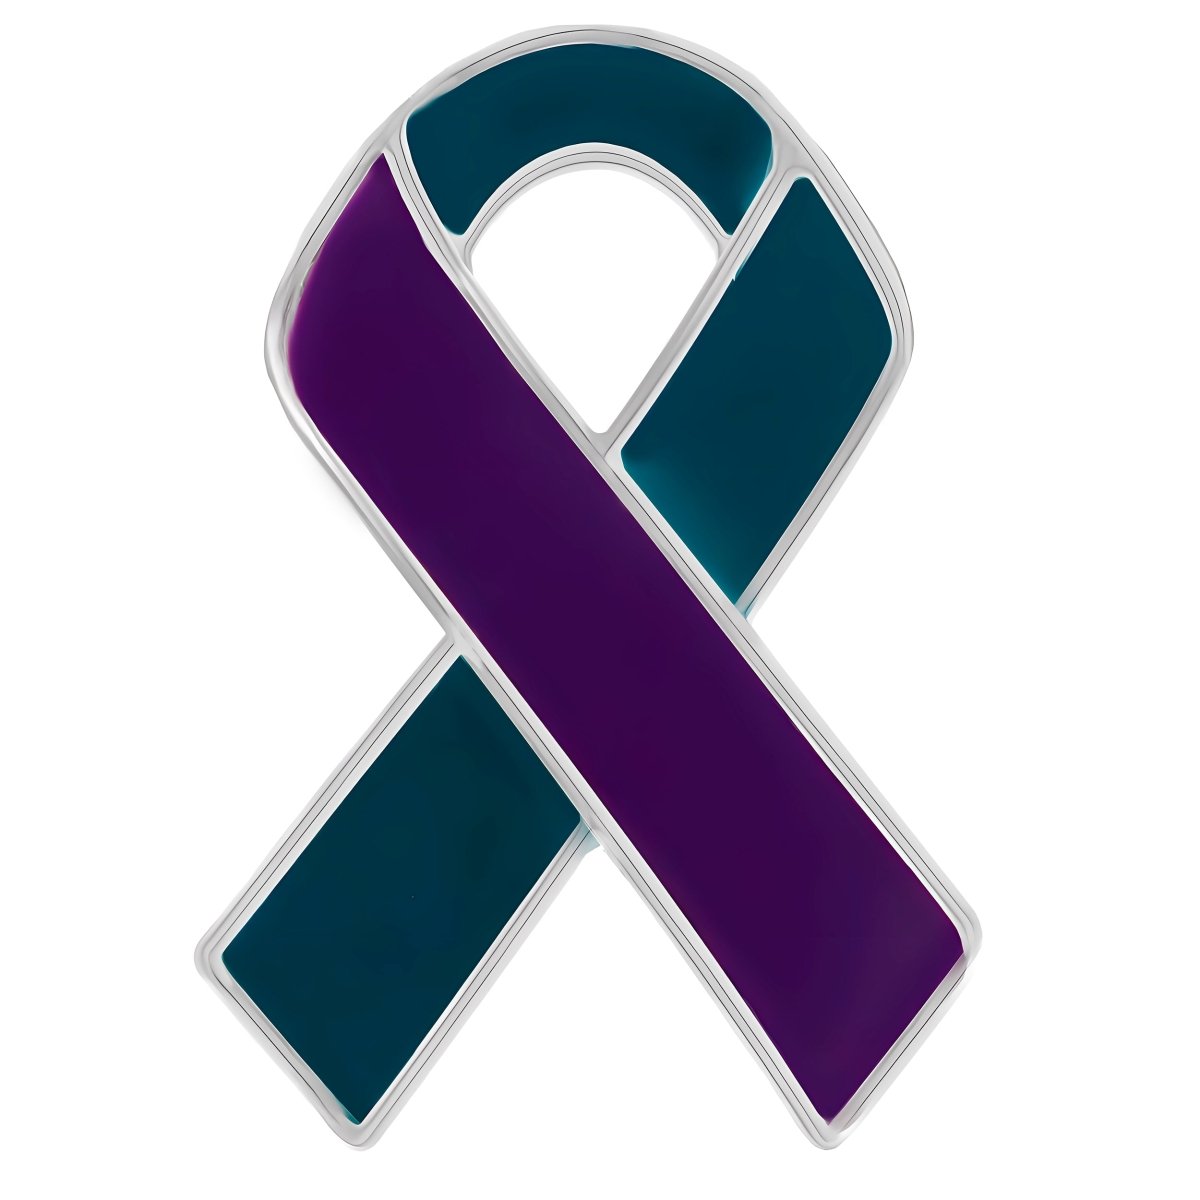 Suicide Teal & Purple Ribbon Awareness Pins - Fundraising For A Cause